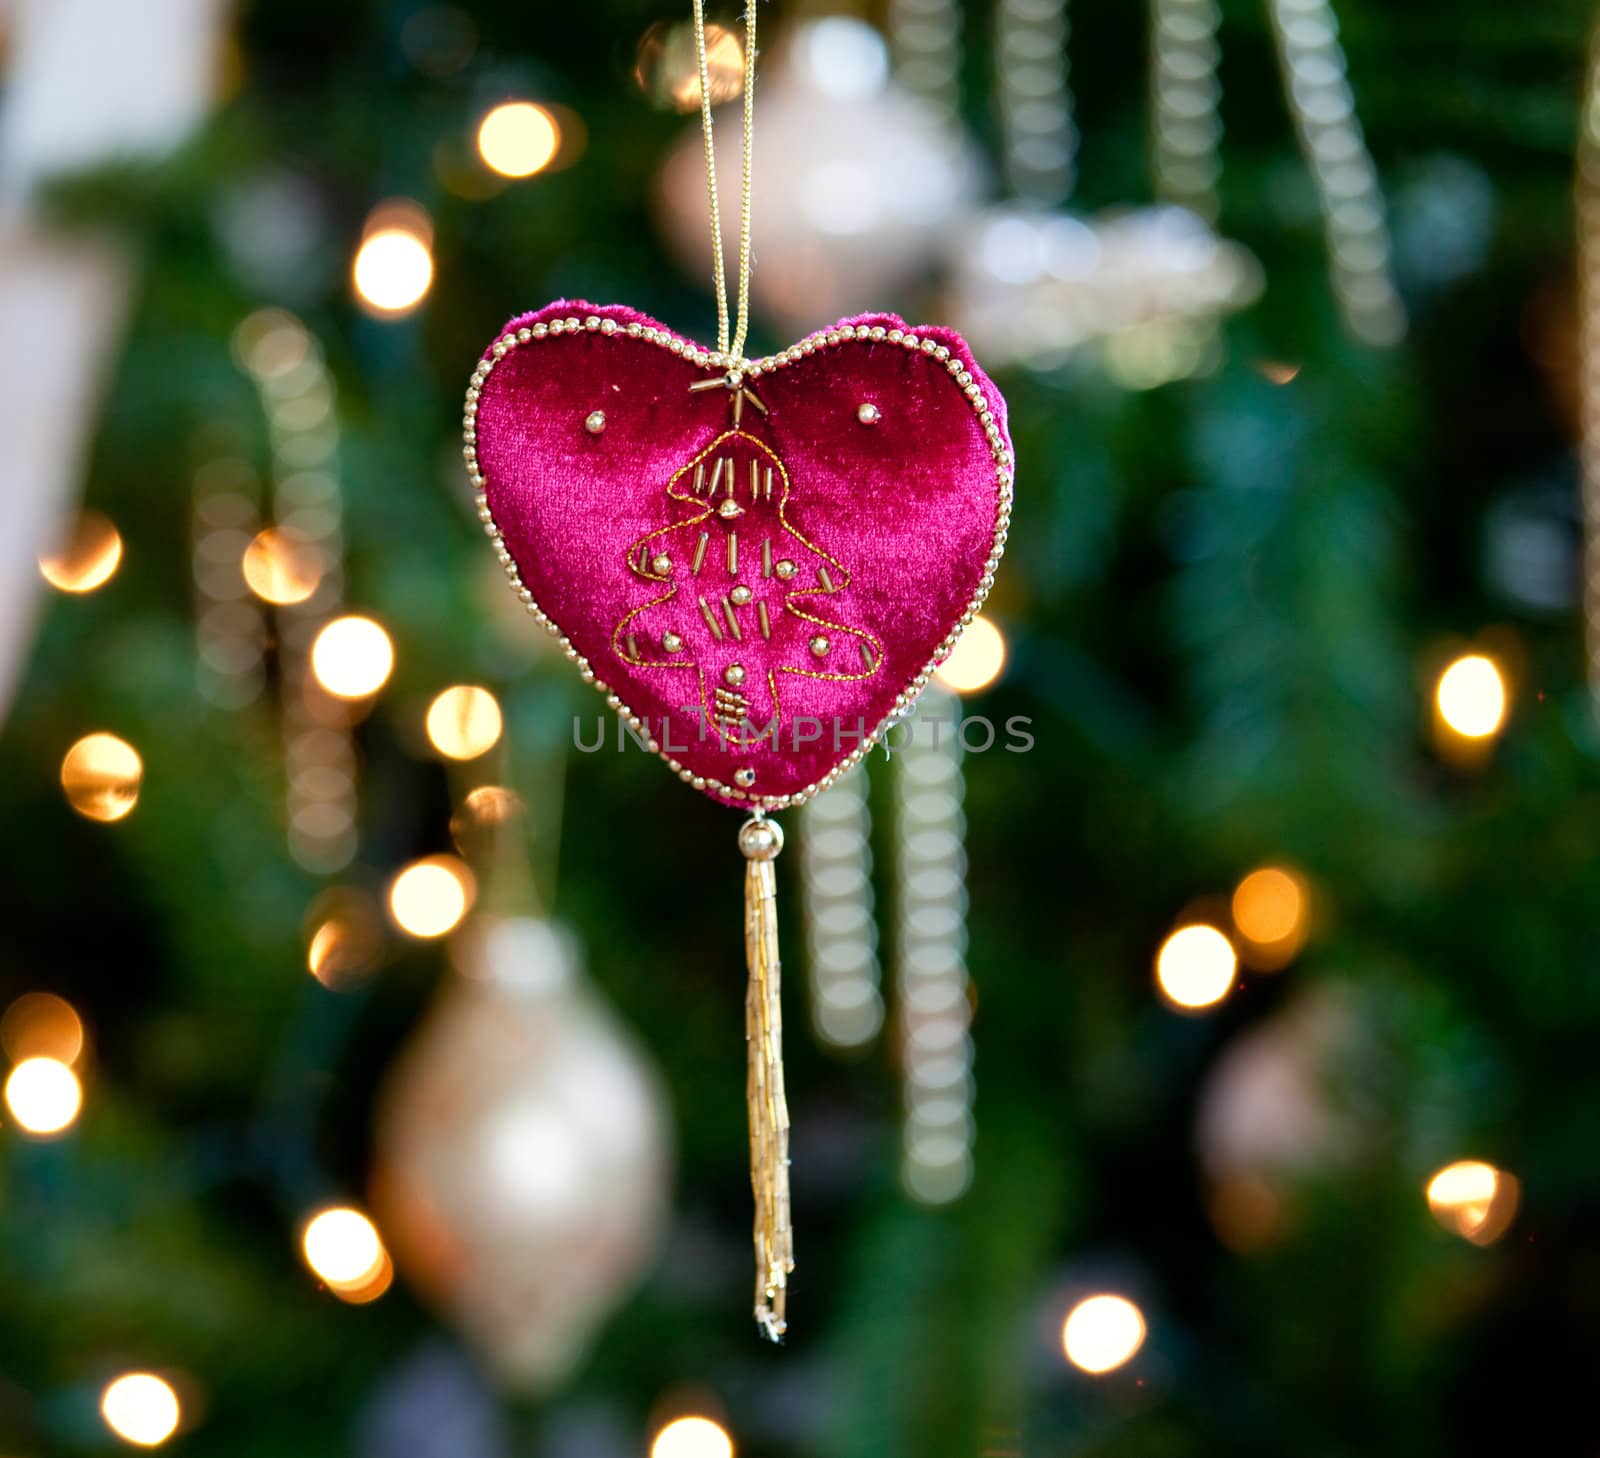 Close up of red velvet heart ornament in front of out of focus christmas decorations